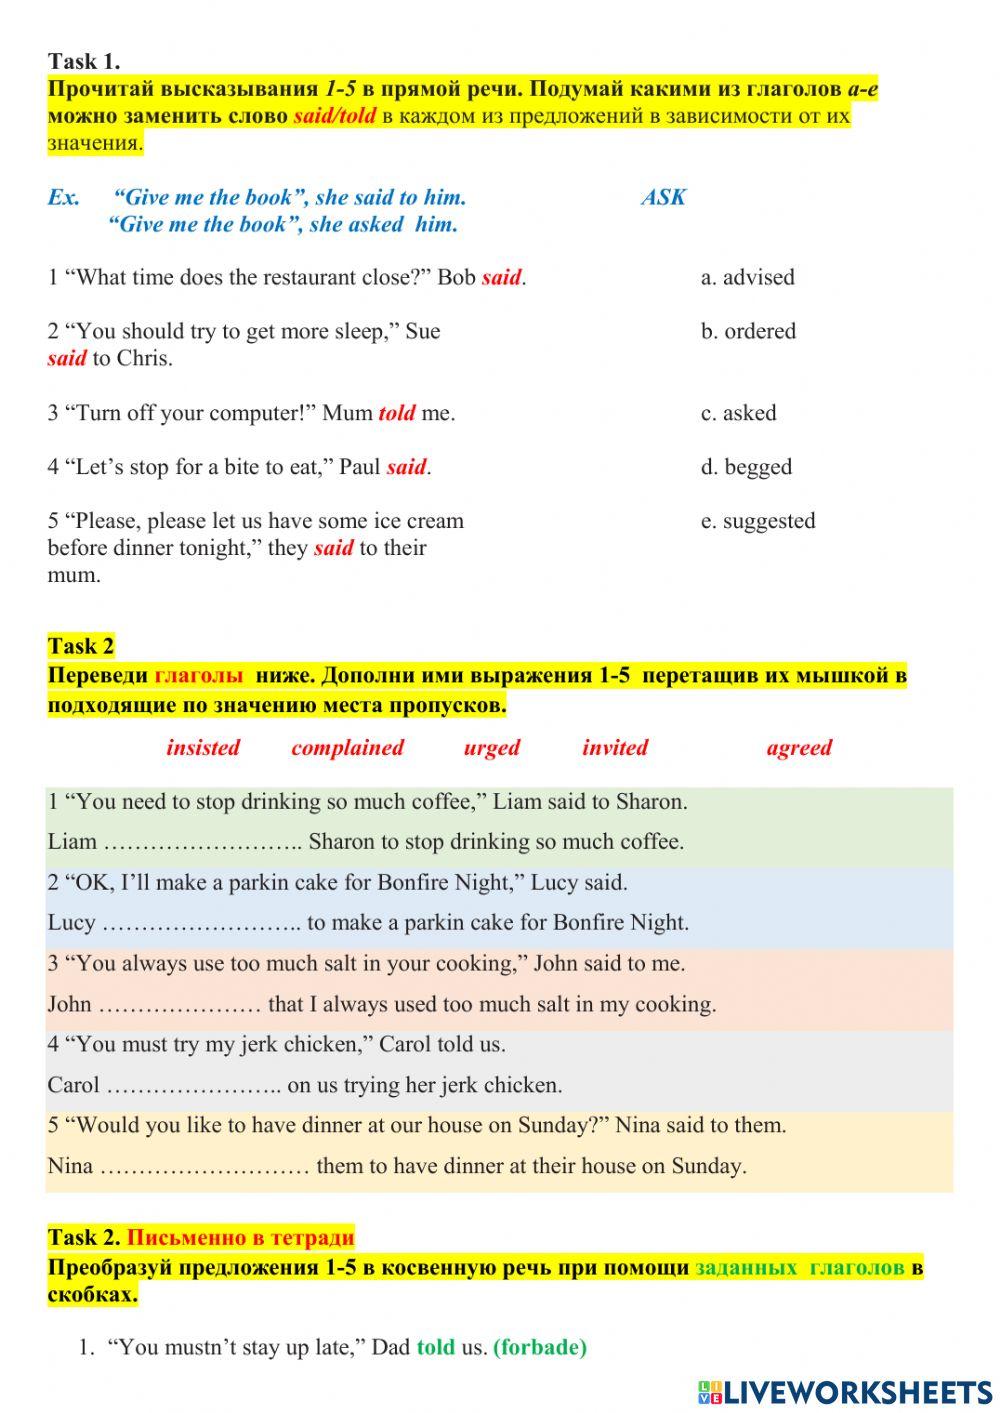 Reported verbs p. 103 SB